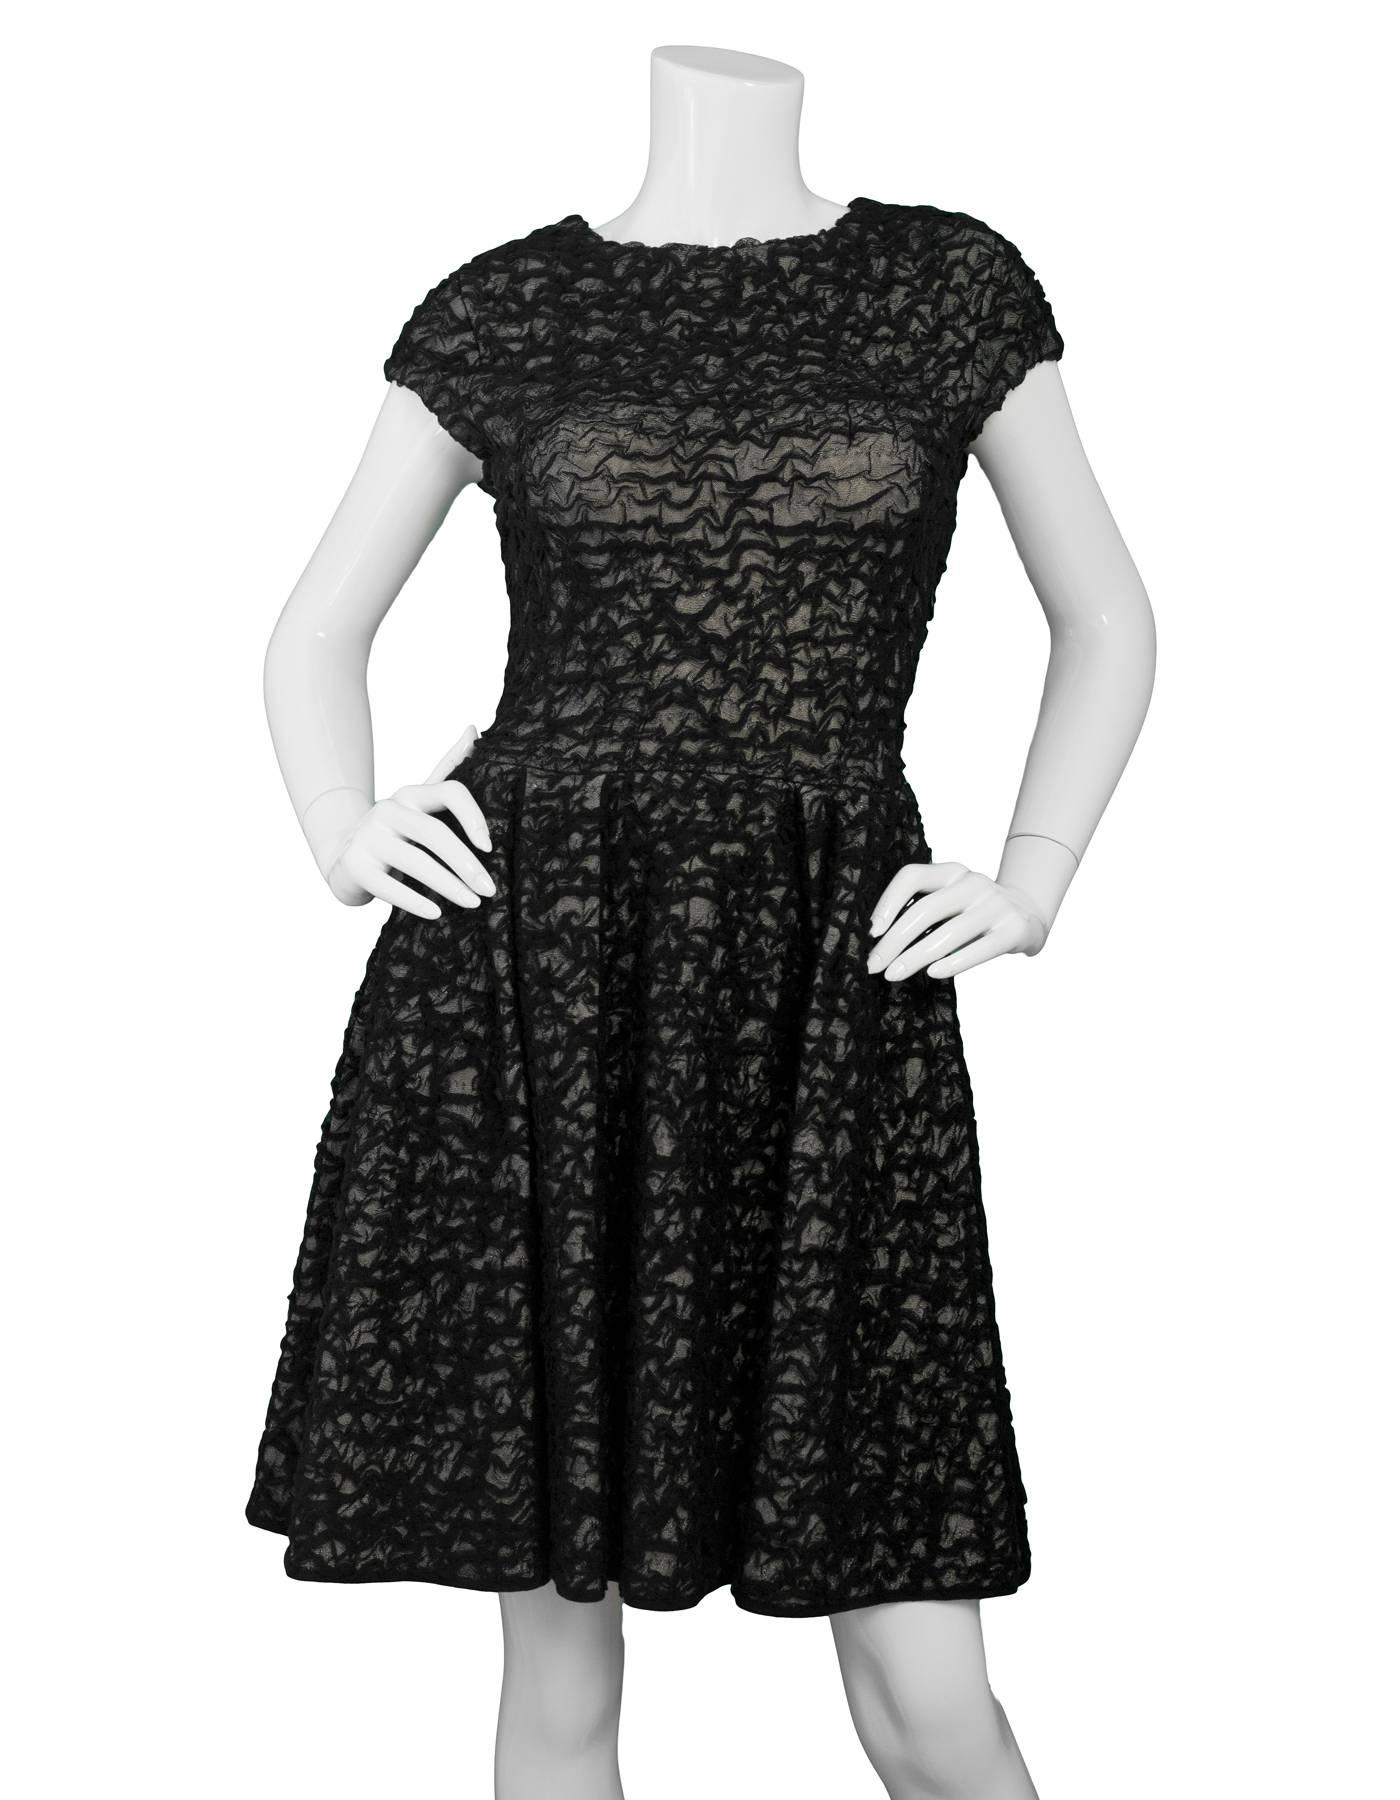 Christian Dior Black & White Textured Mesh Skater Dress

Made In: France
Color: Black and white
Composition: 60% viscose, 20% cotton, 18% polyamide, 2% elastane
Lining: None
Closure/Opening: Side zipper
Exterior Pockets: None
Interior Pockets: